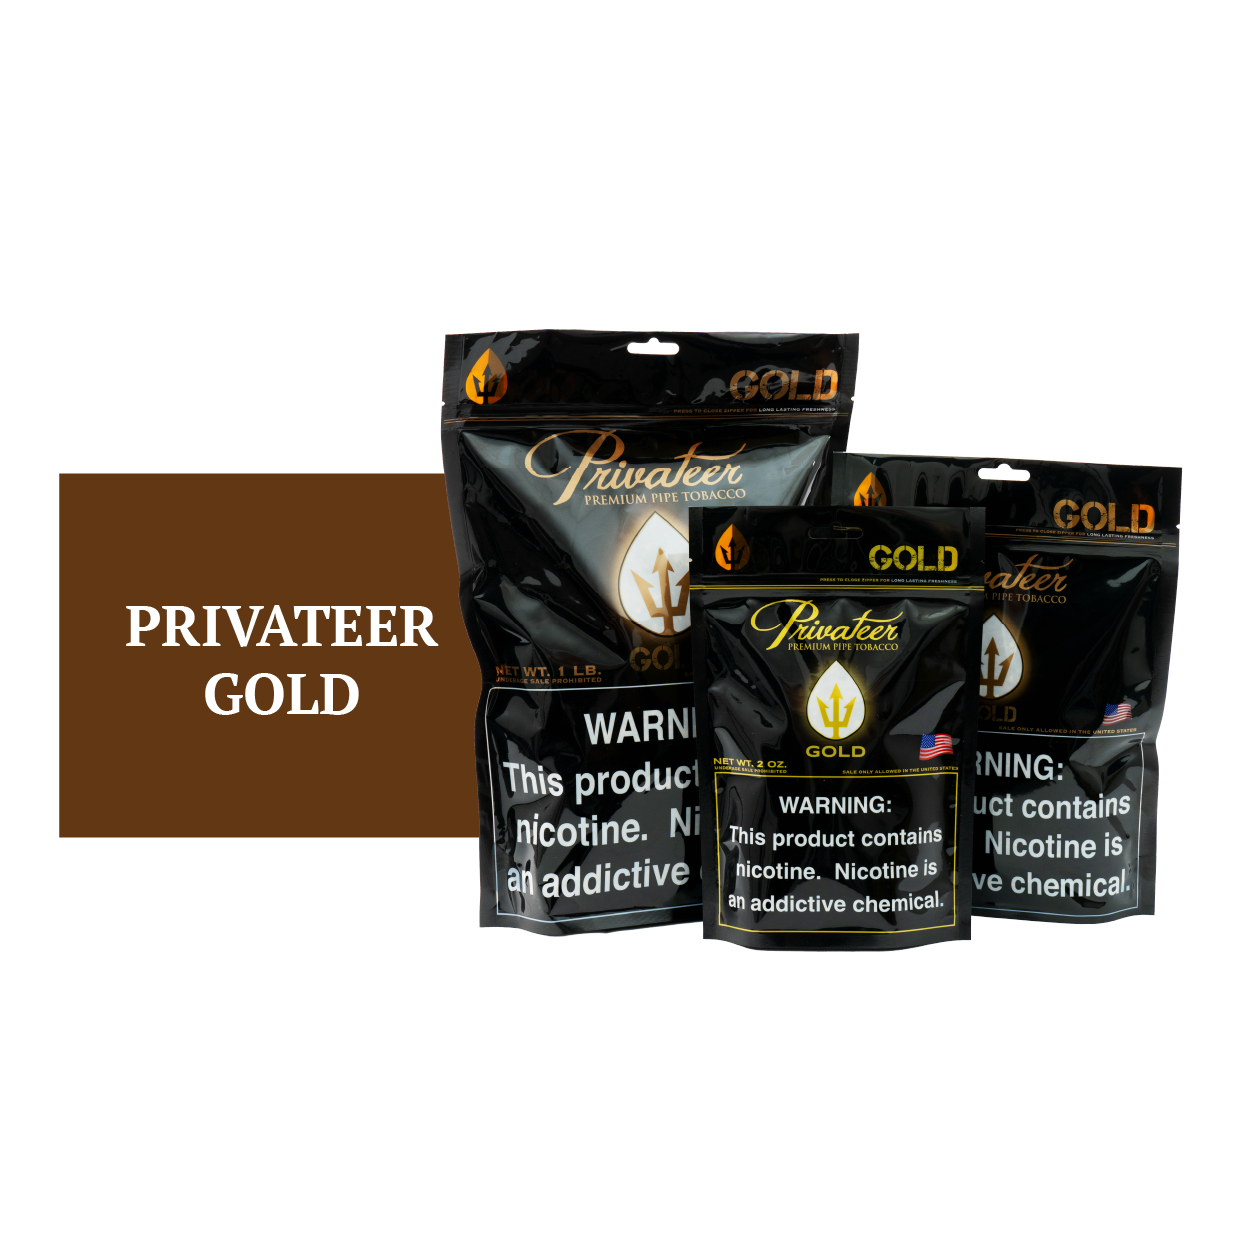 Privateer Gold bags.